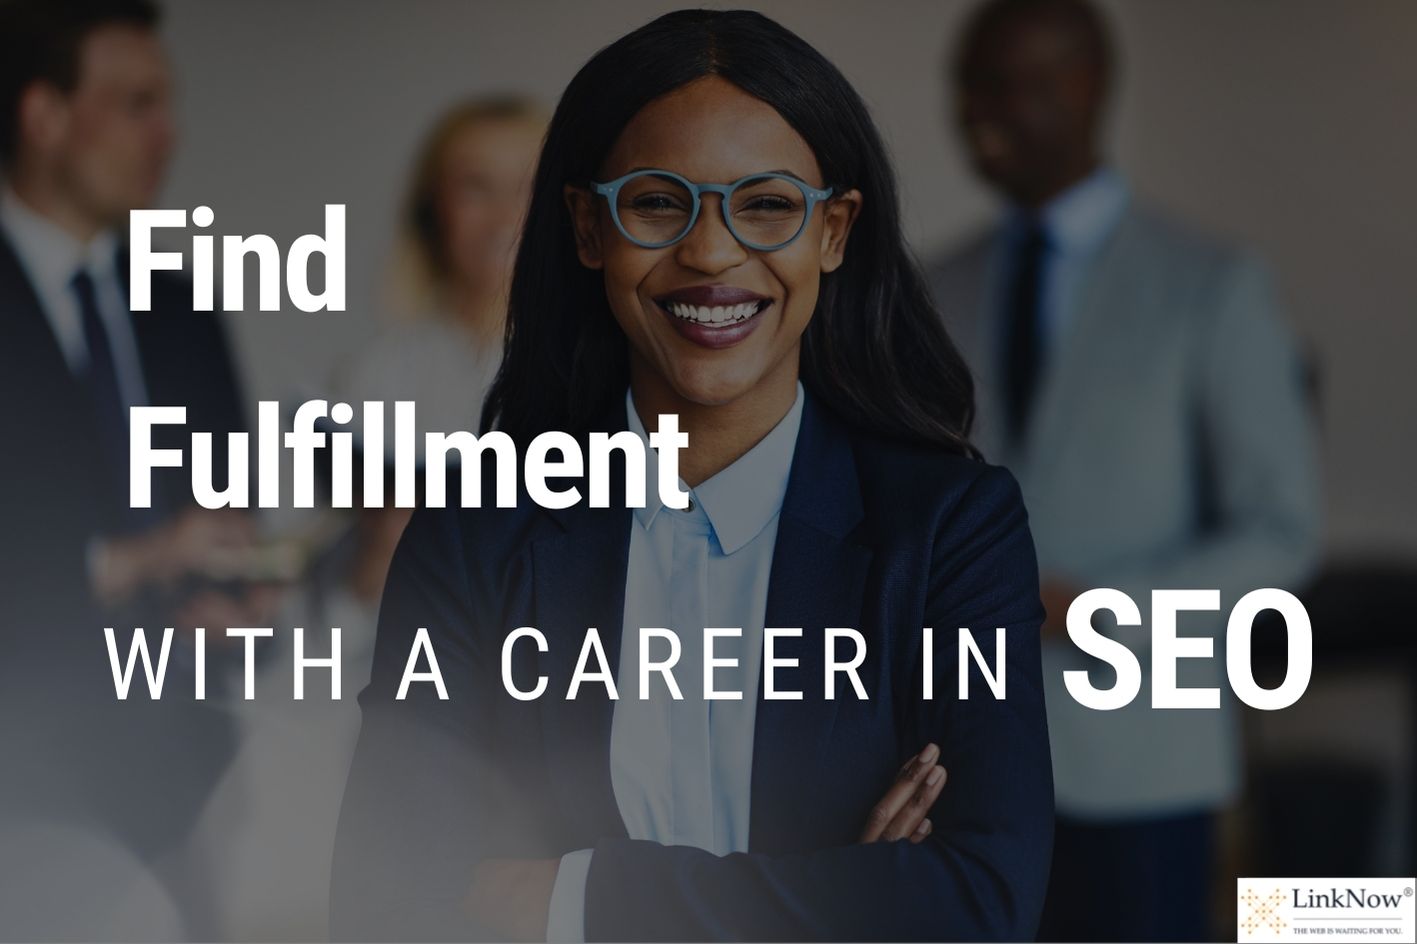 Woman in professional attire facing forward and smiling. Caption says: Find fulfillment with a career in SEO.